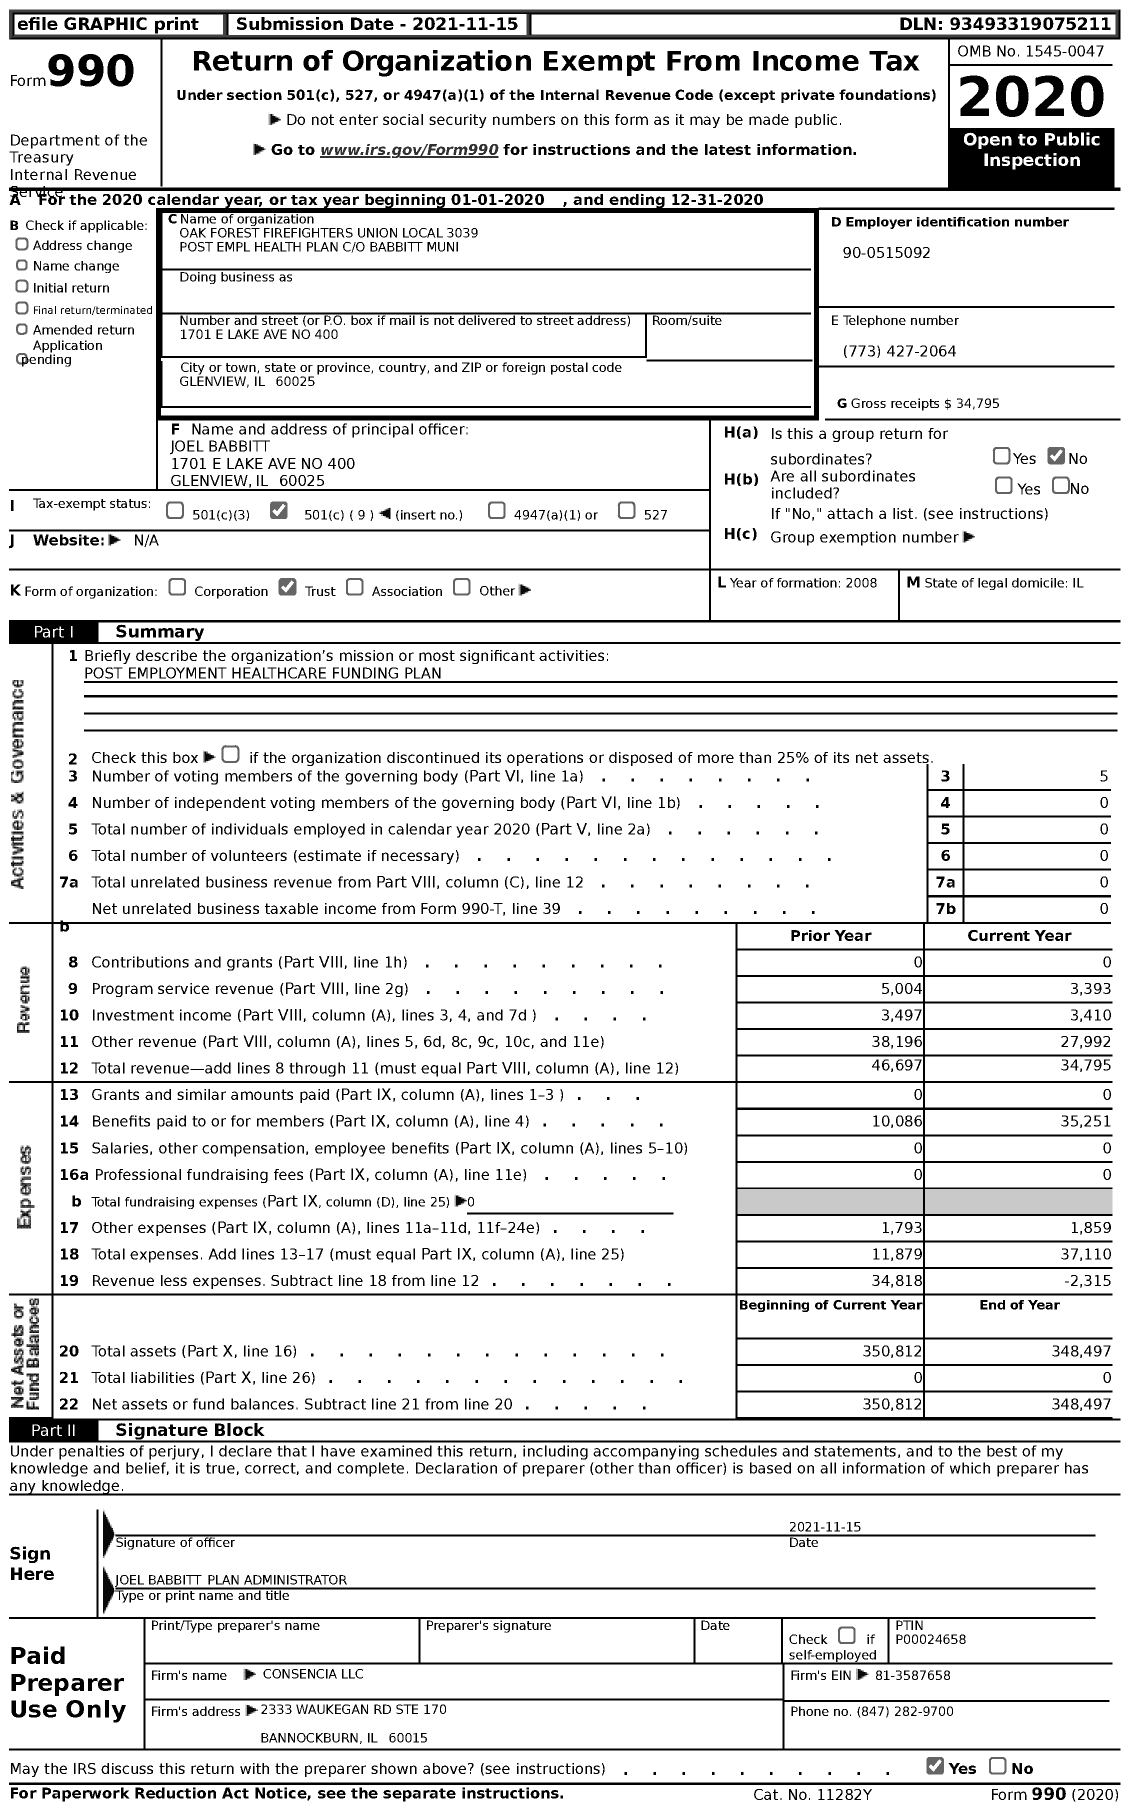 Image of first page of 2020 Form 990 for Oak Forest Firefighters Union Local 3039 Post Empl Health Plan